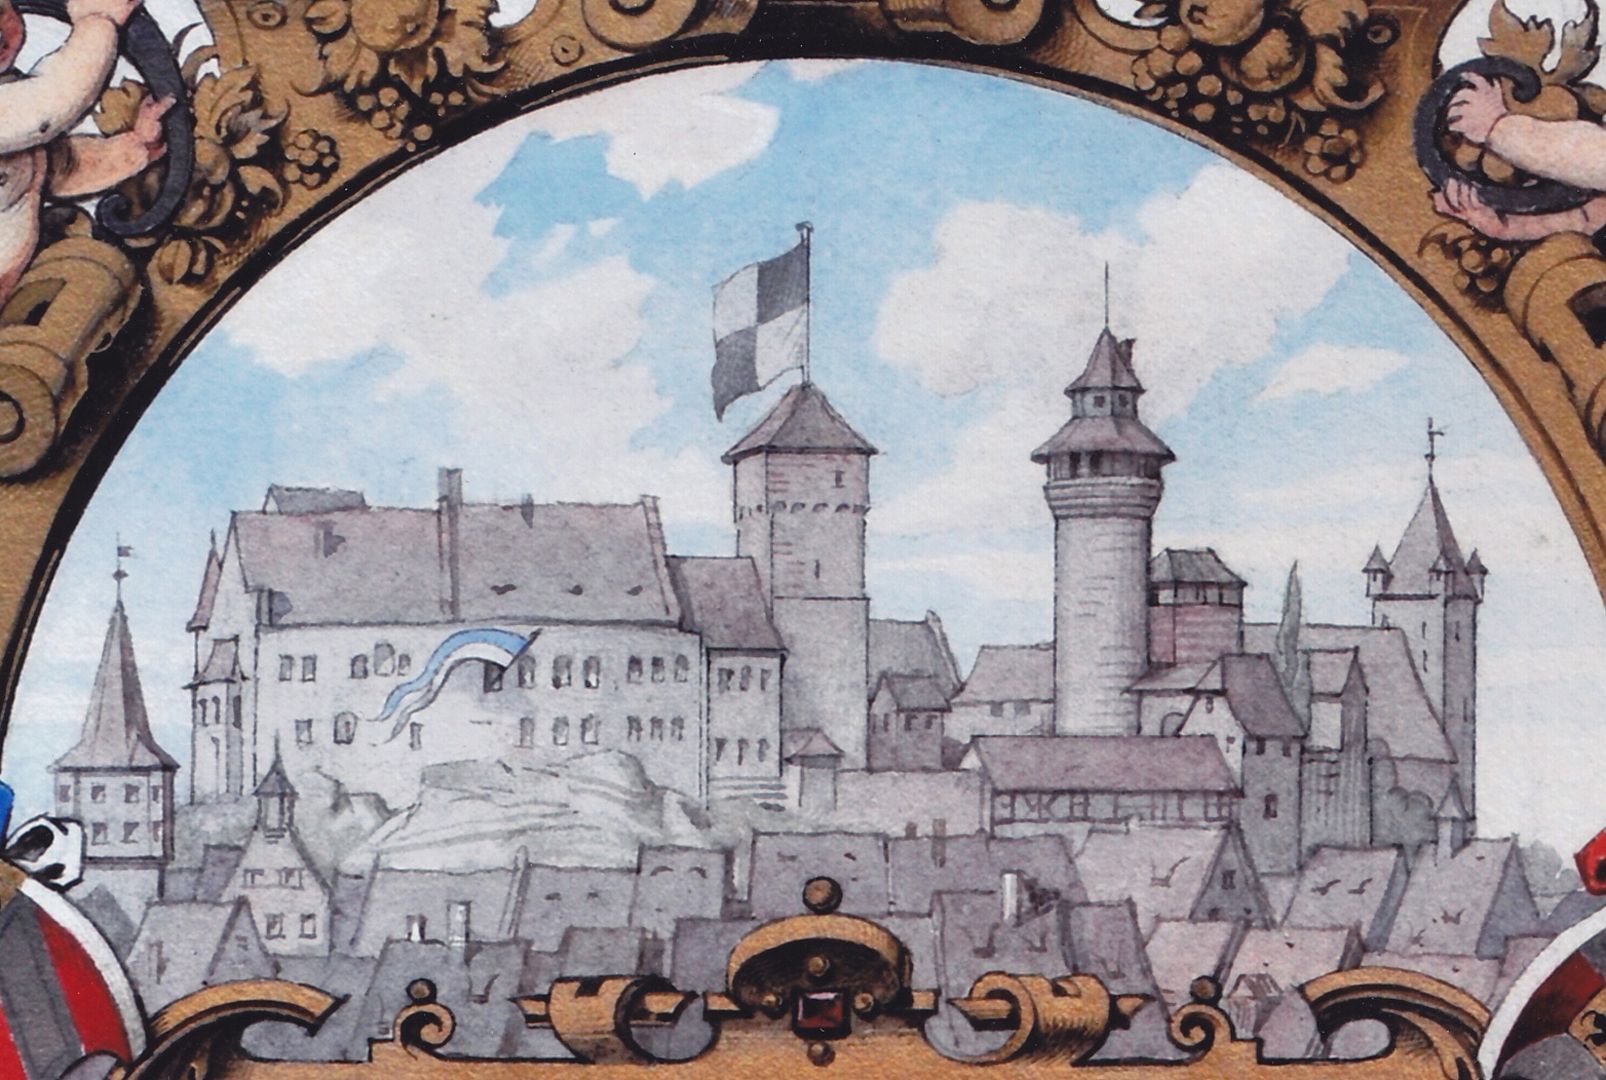 Title page of a splendid binding Nuremberg castle silhouette. On the Heidenturm flag with Hohenzollern coat of arms, in the window of the Palas white-blue flag for the Kingdom of Bavaria.